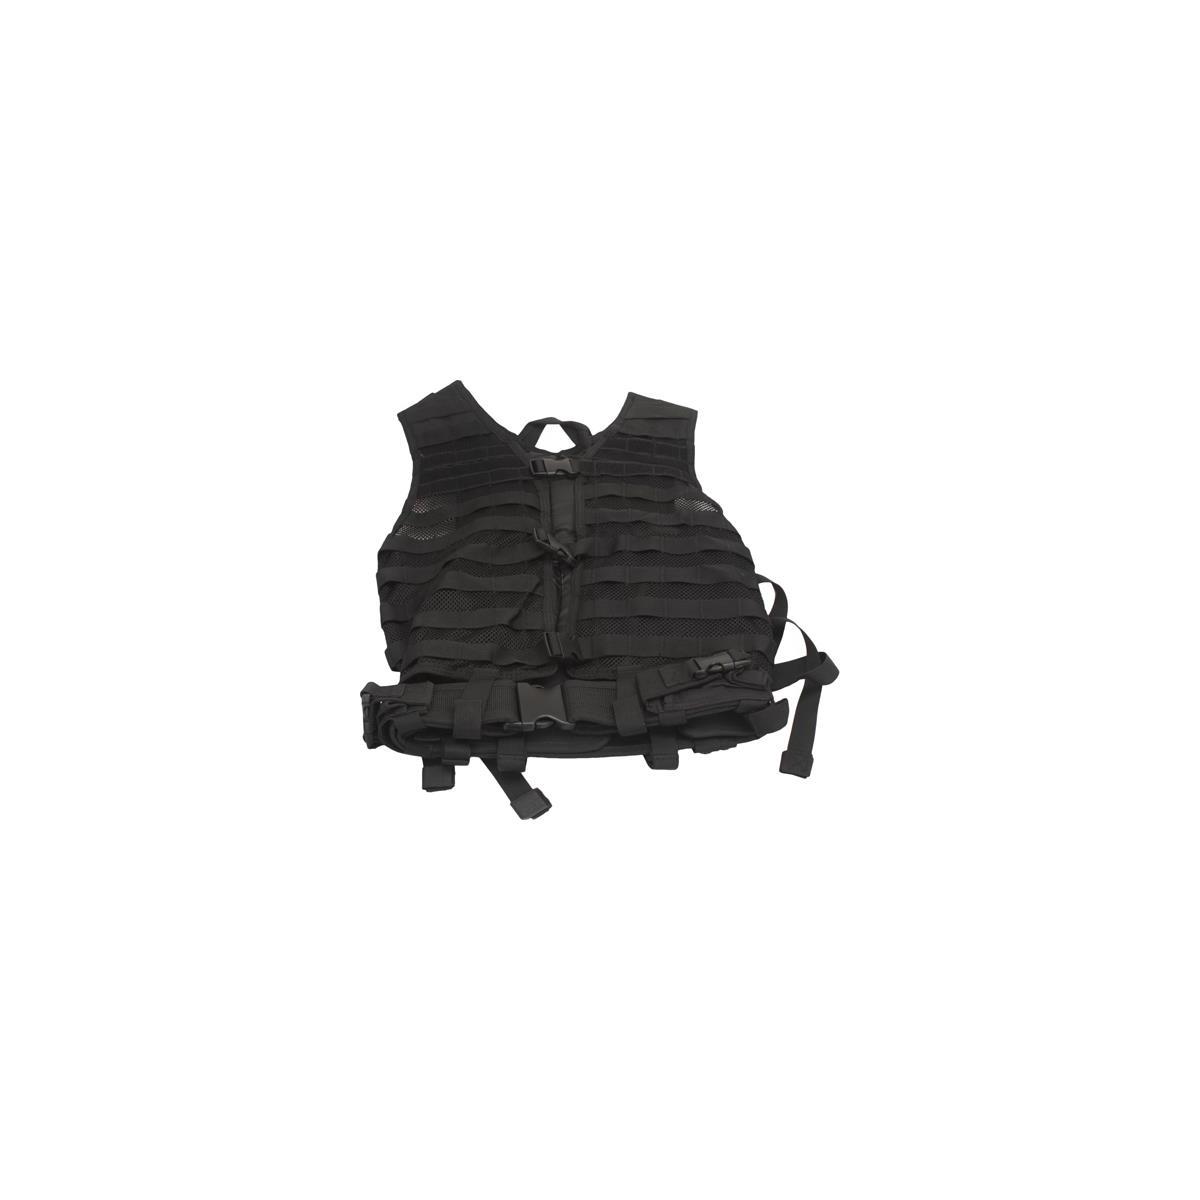 Image of NcSTAR Vism NcStar Vism Zombie Infected Kit with Vest/5 Pouches